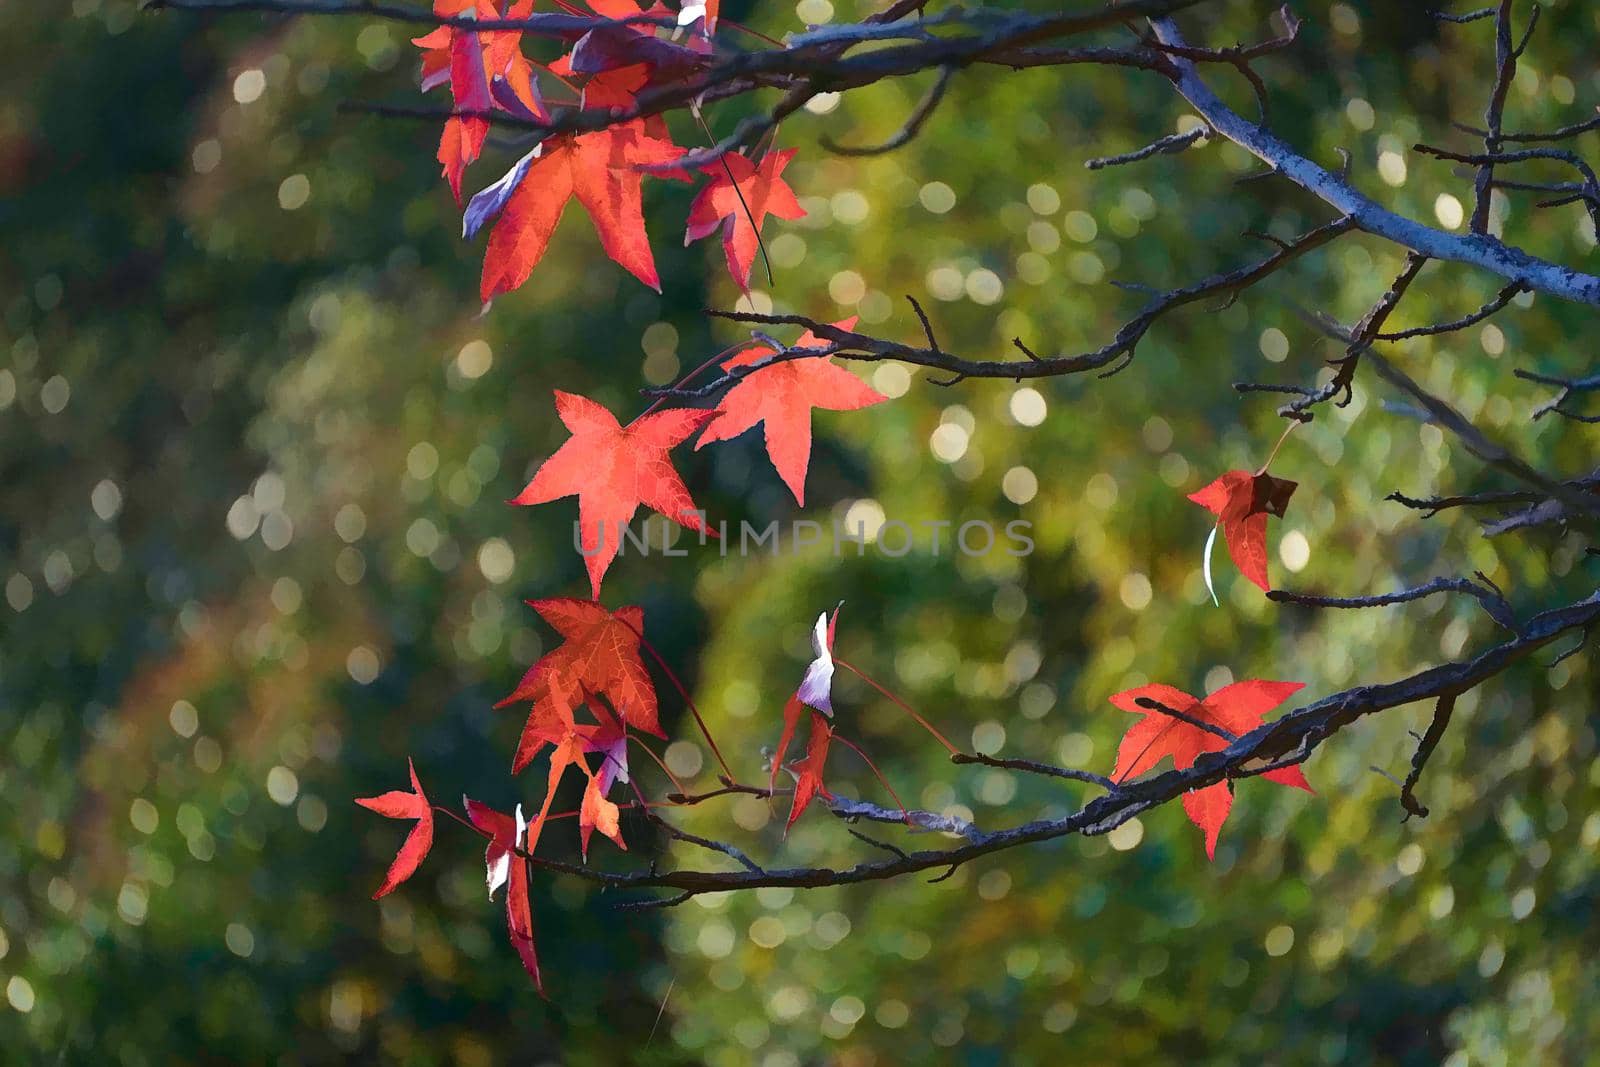 The red leaves of a canadian maple on the green blurred background with bokeh by Vvicca